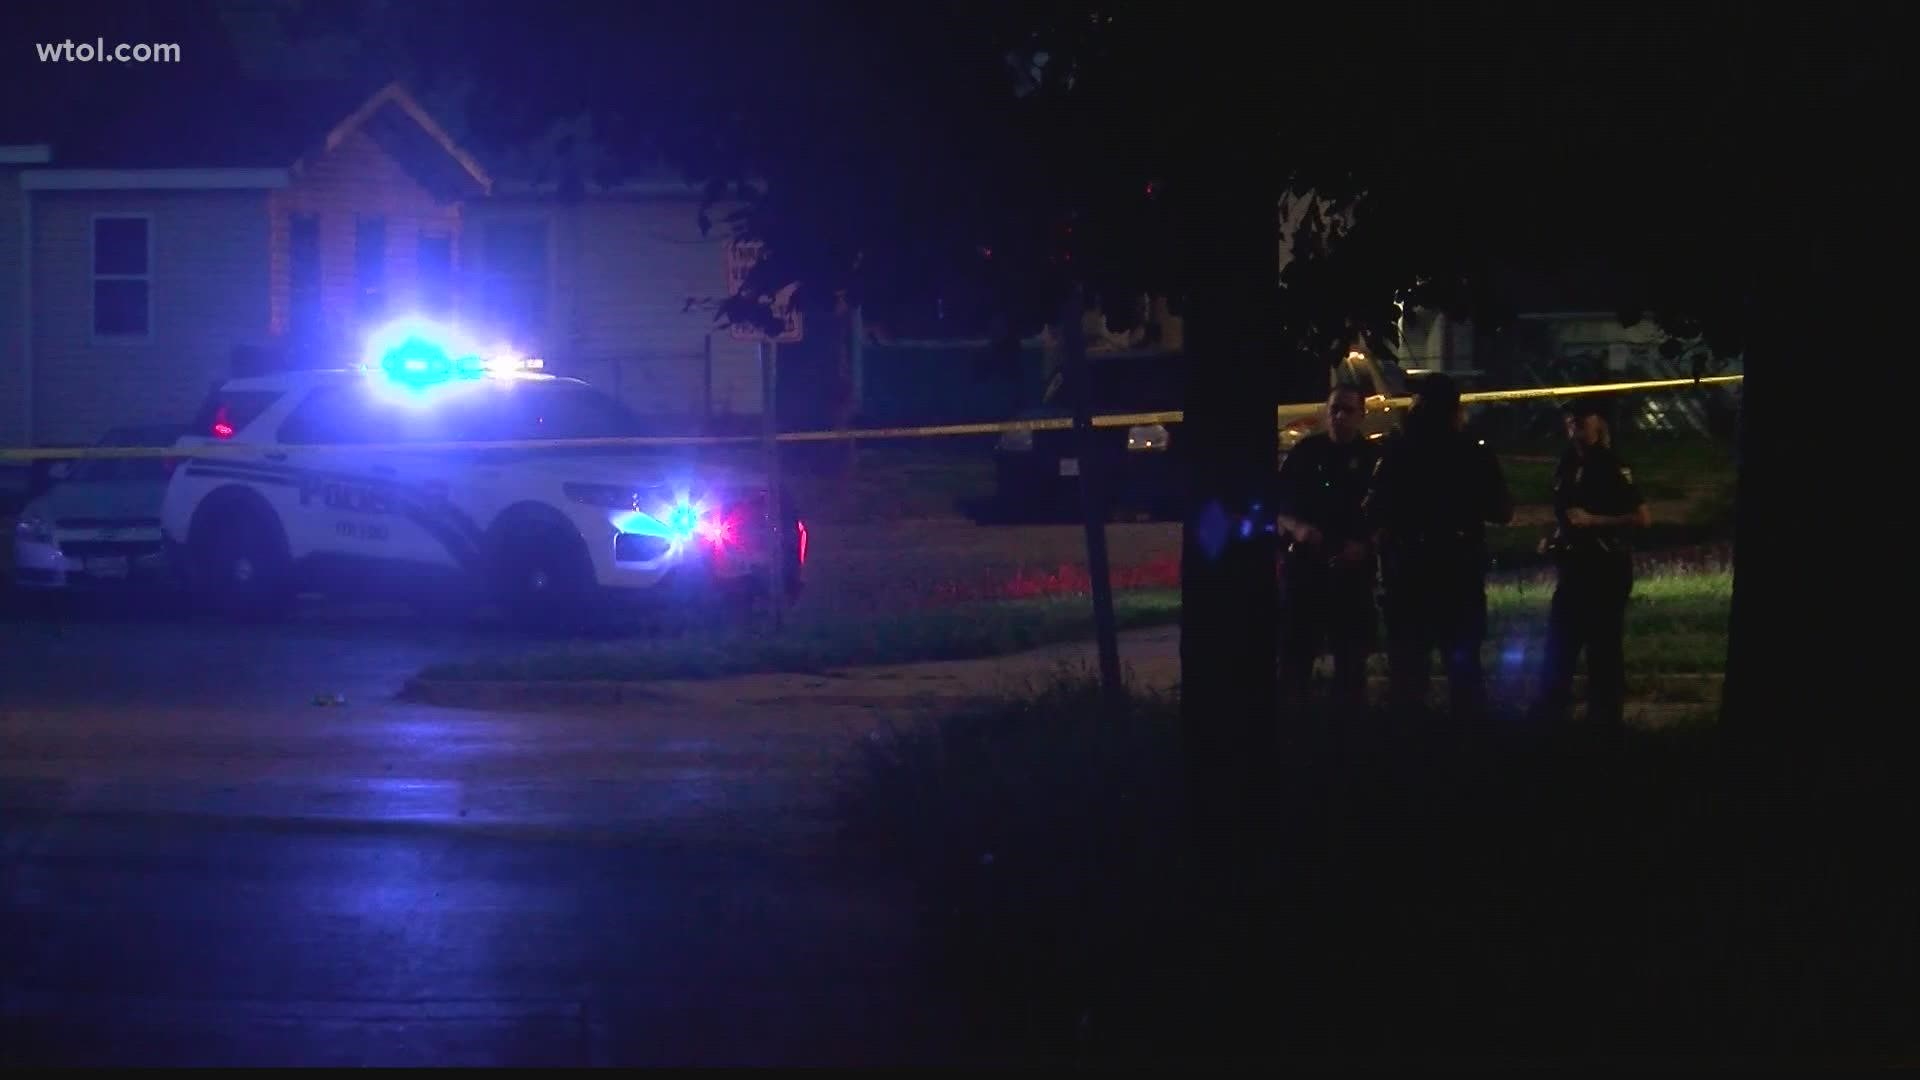 According to police, 14 shots were fired Friday night and multiple gunmen could be responsible.